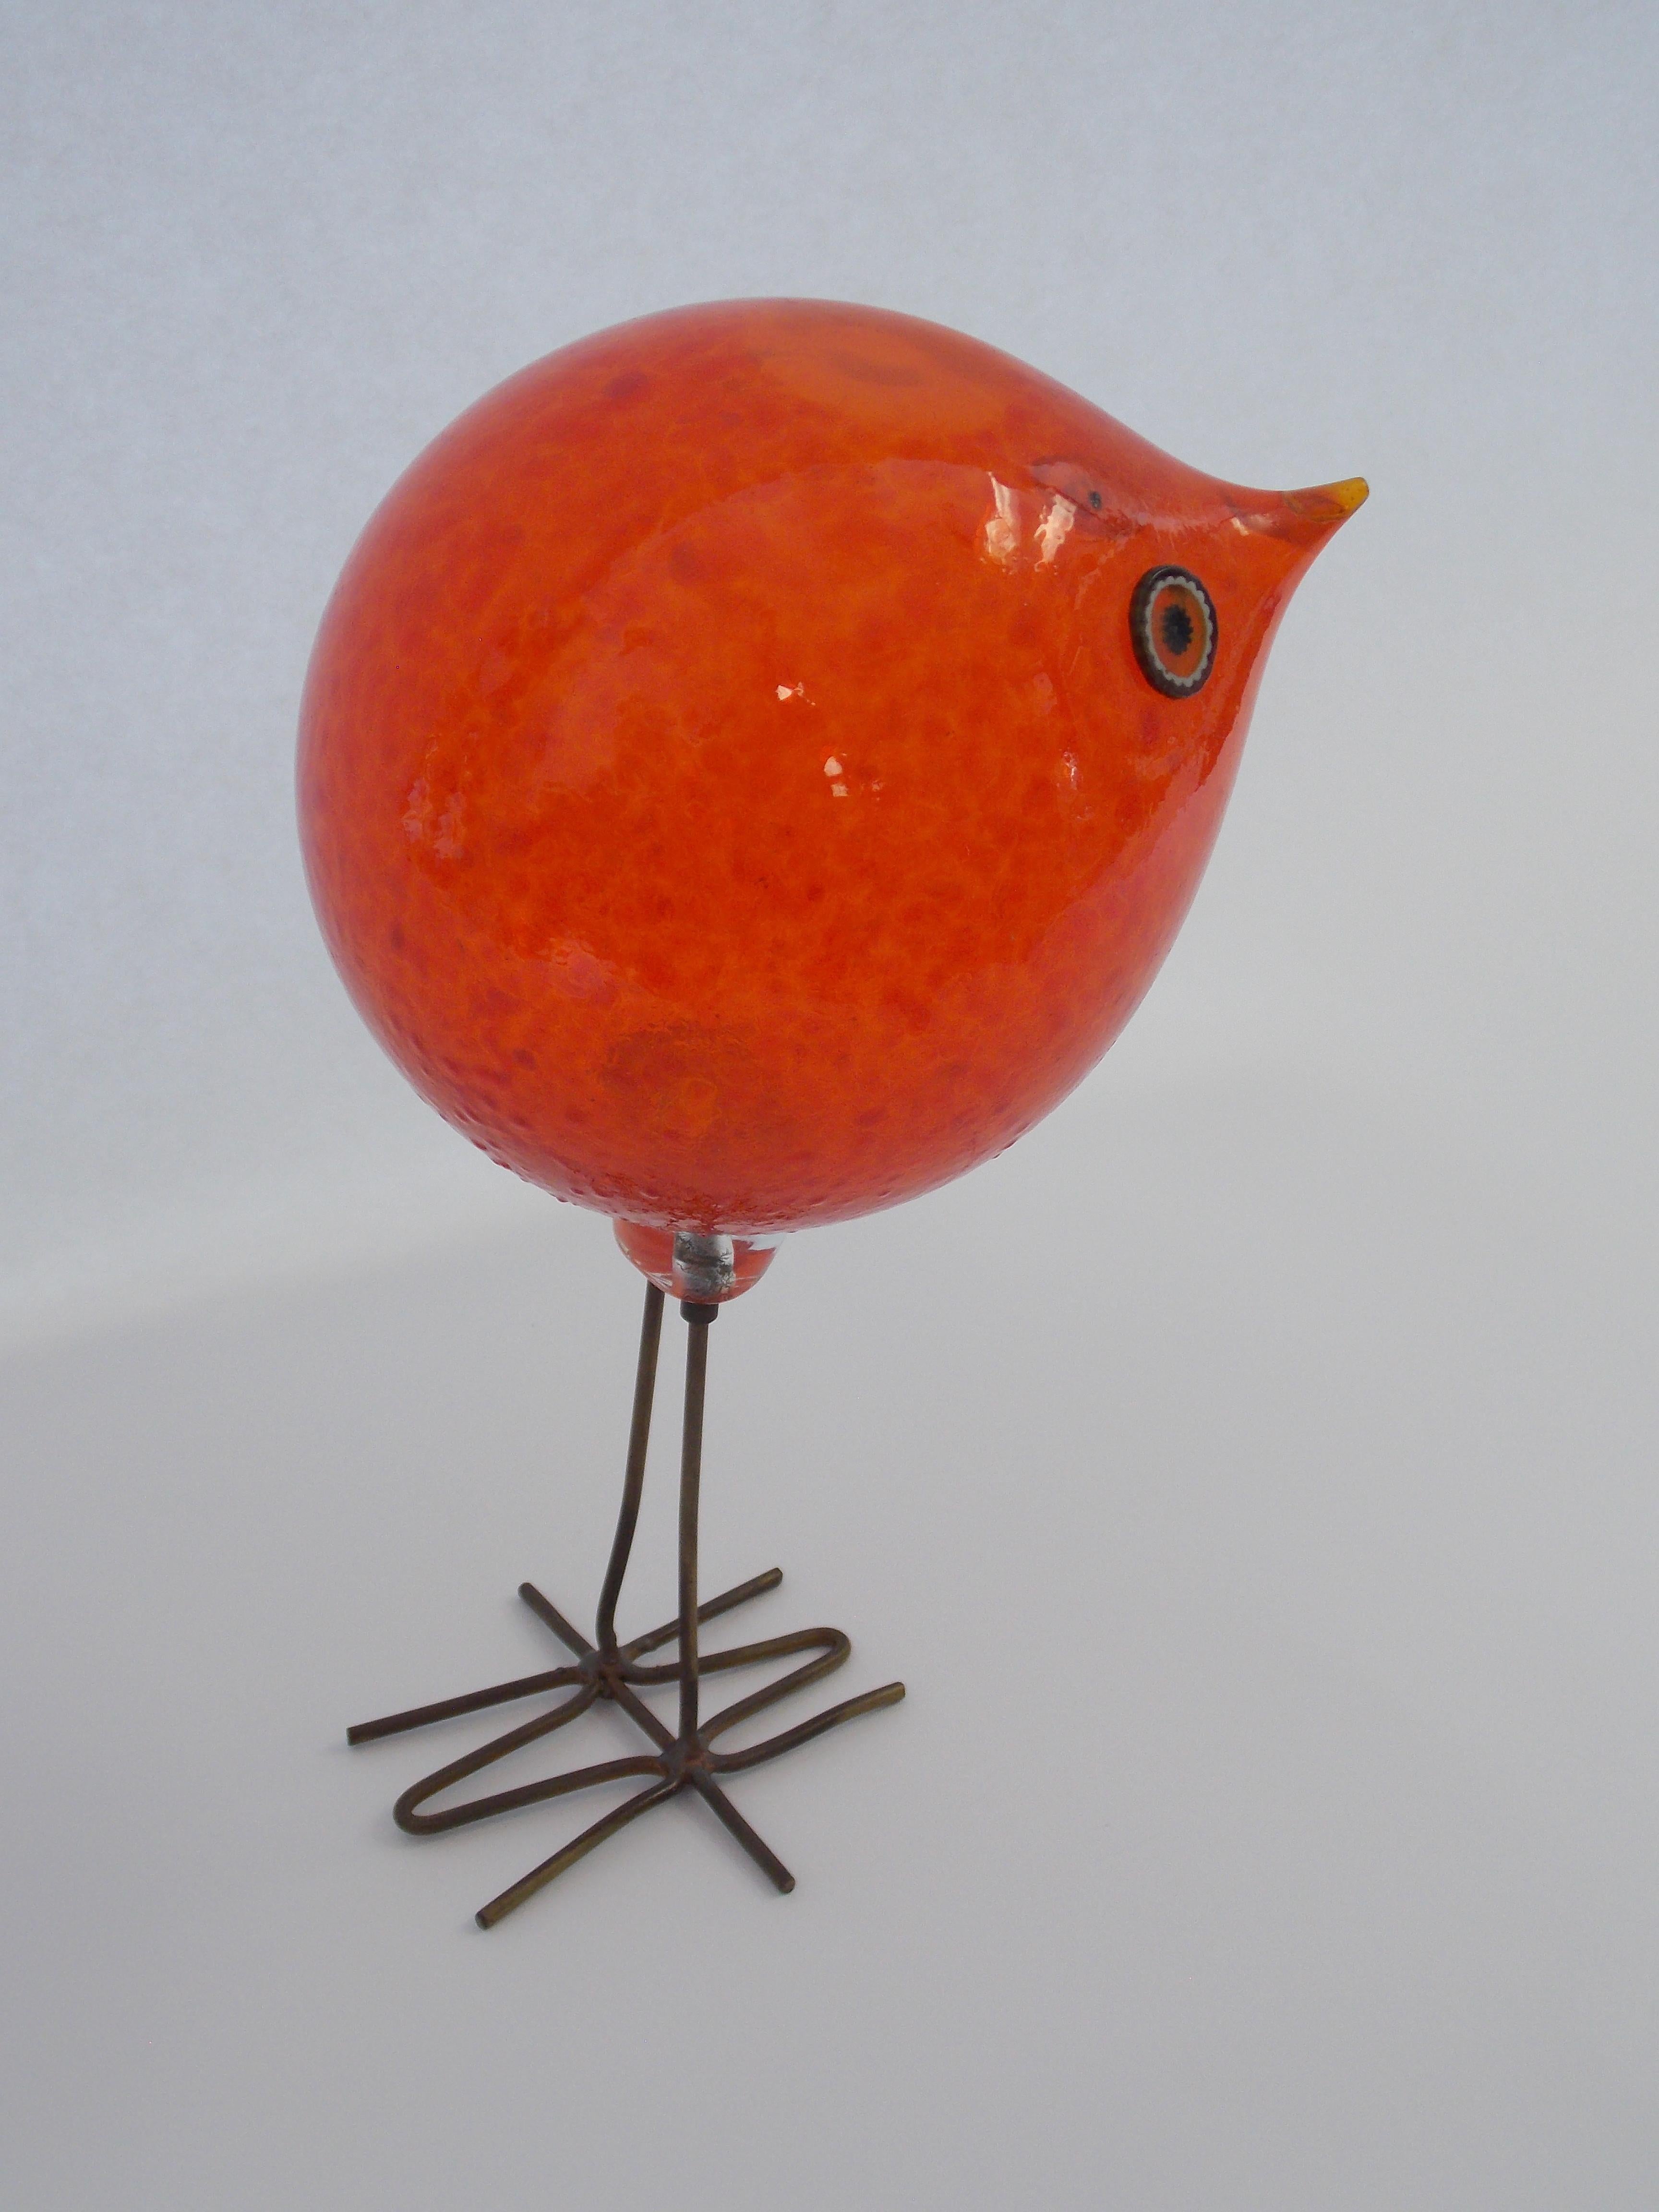 An Orange Pulcini Bird Designed by Alessandro Pianon and manufactured by Vistosi c. 1963o
Smooth surface with copper legs.
Minor carbon black spot, which happens in the making 
The beak was broken and professionally repaired By Old world